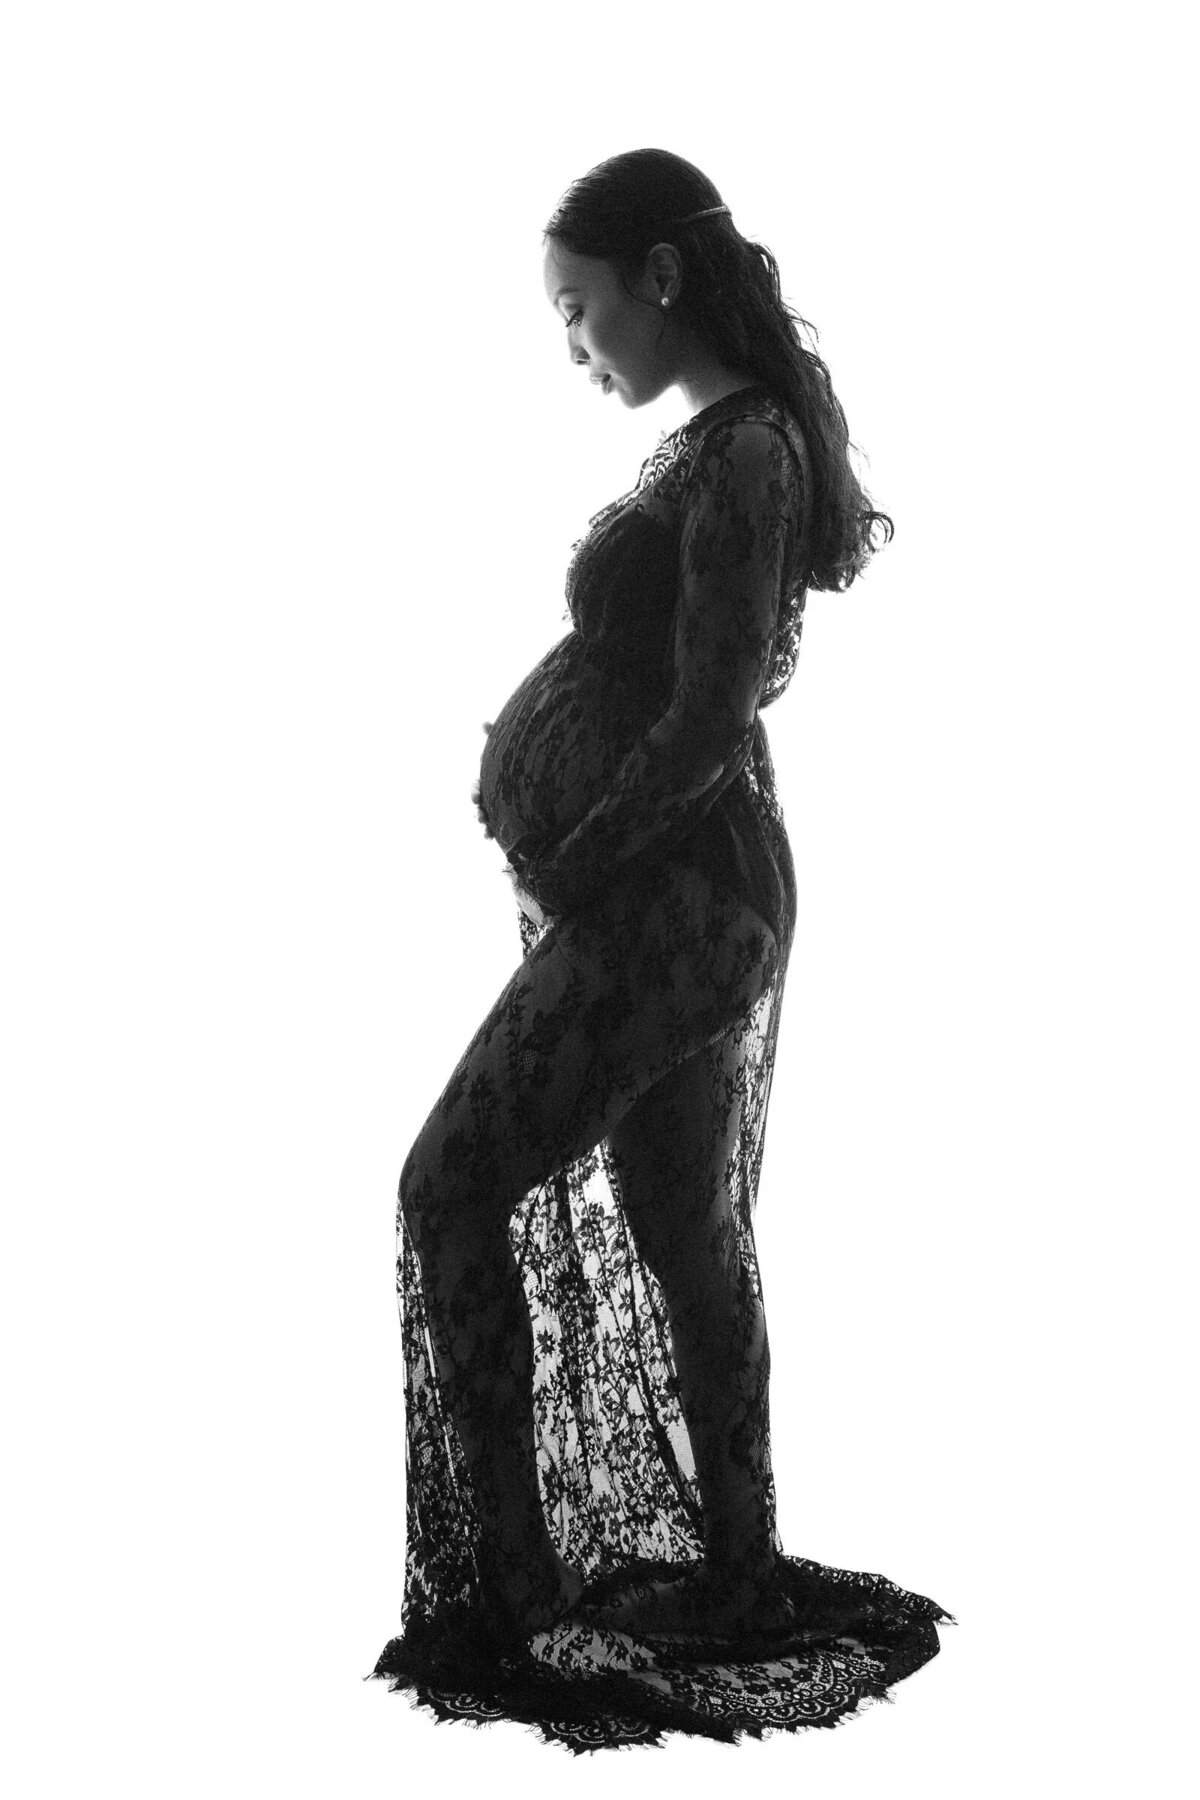 A woman in a long lace dress holding her pregnant stomach.